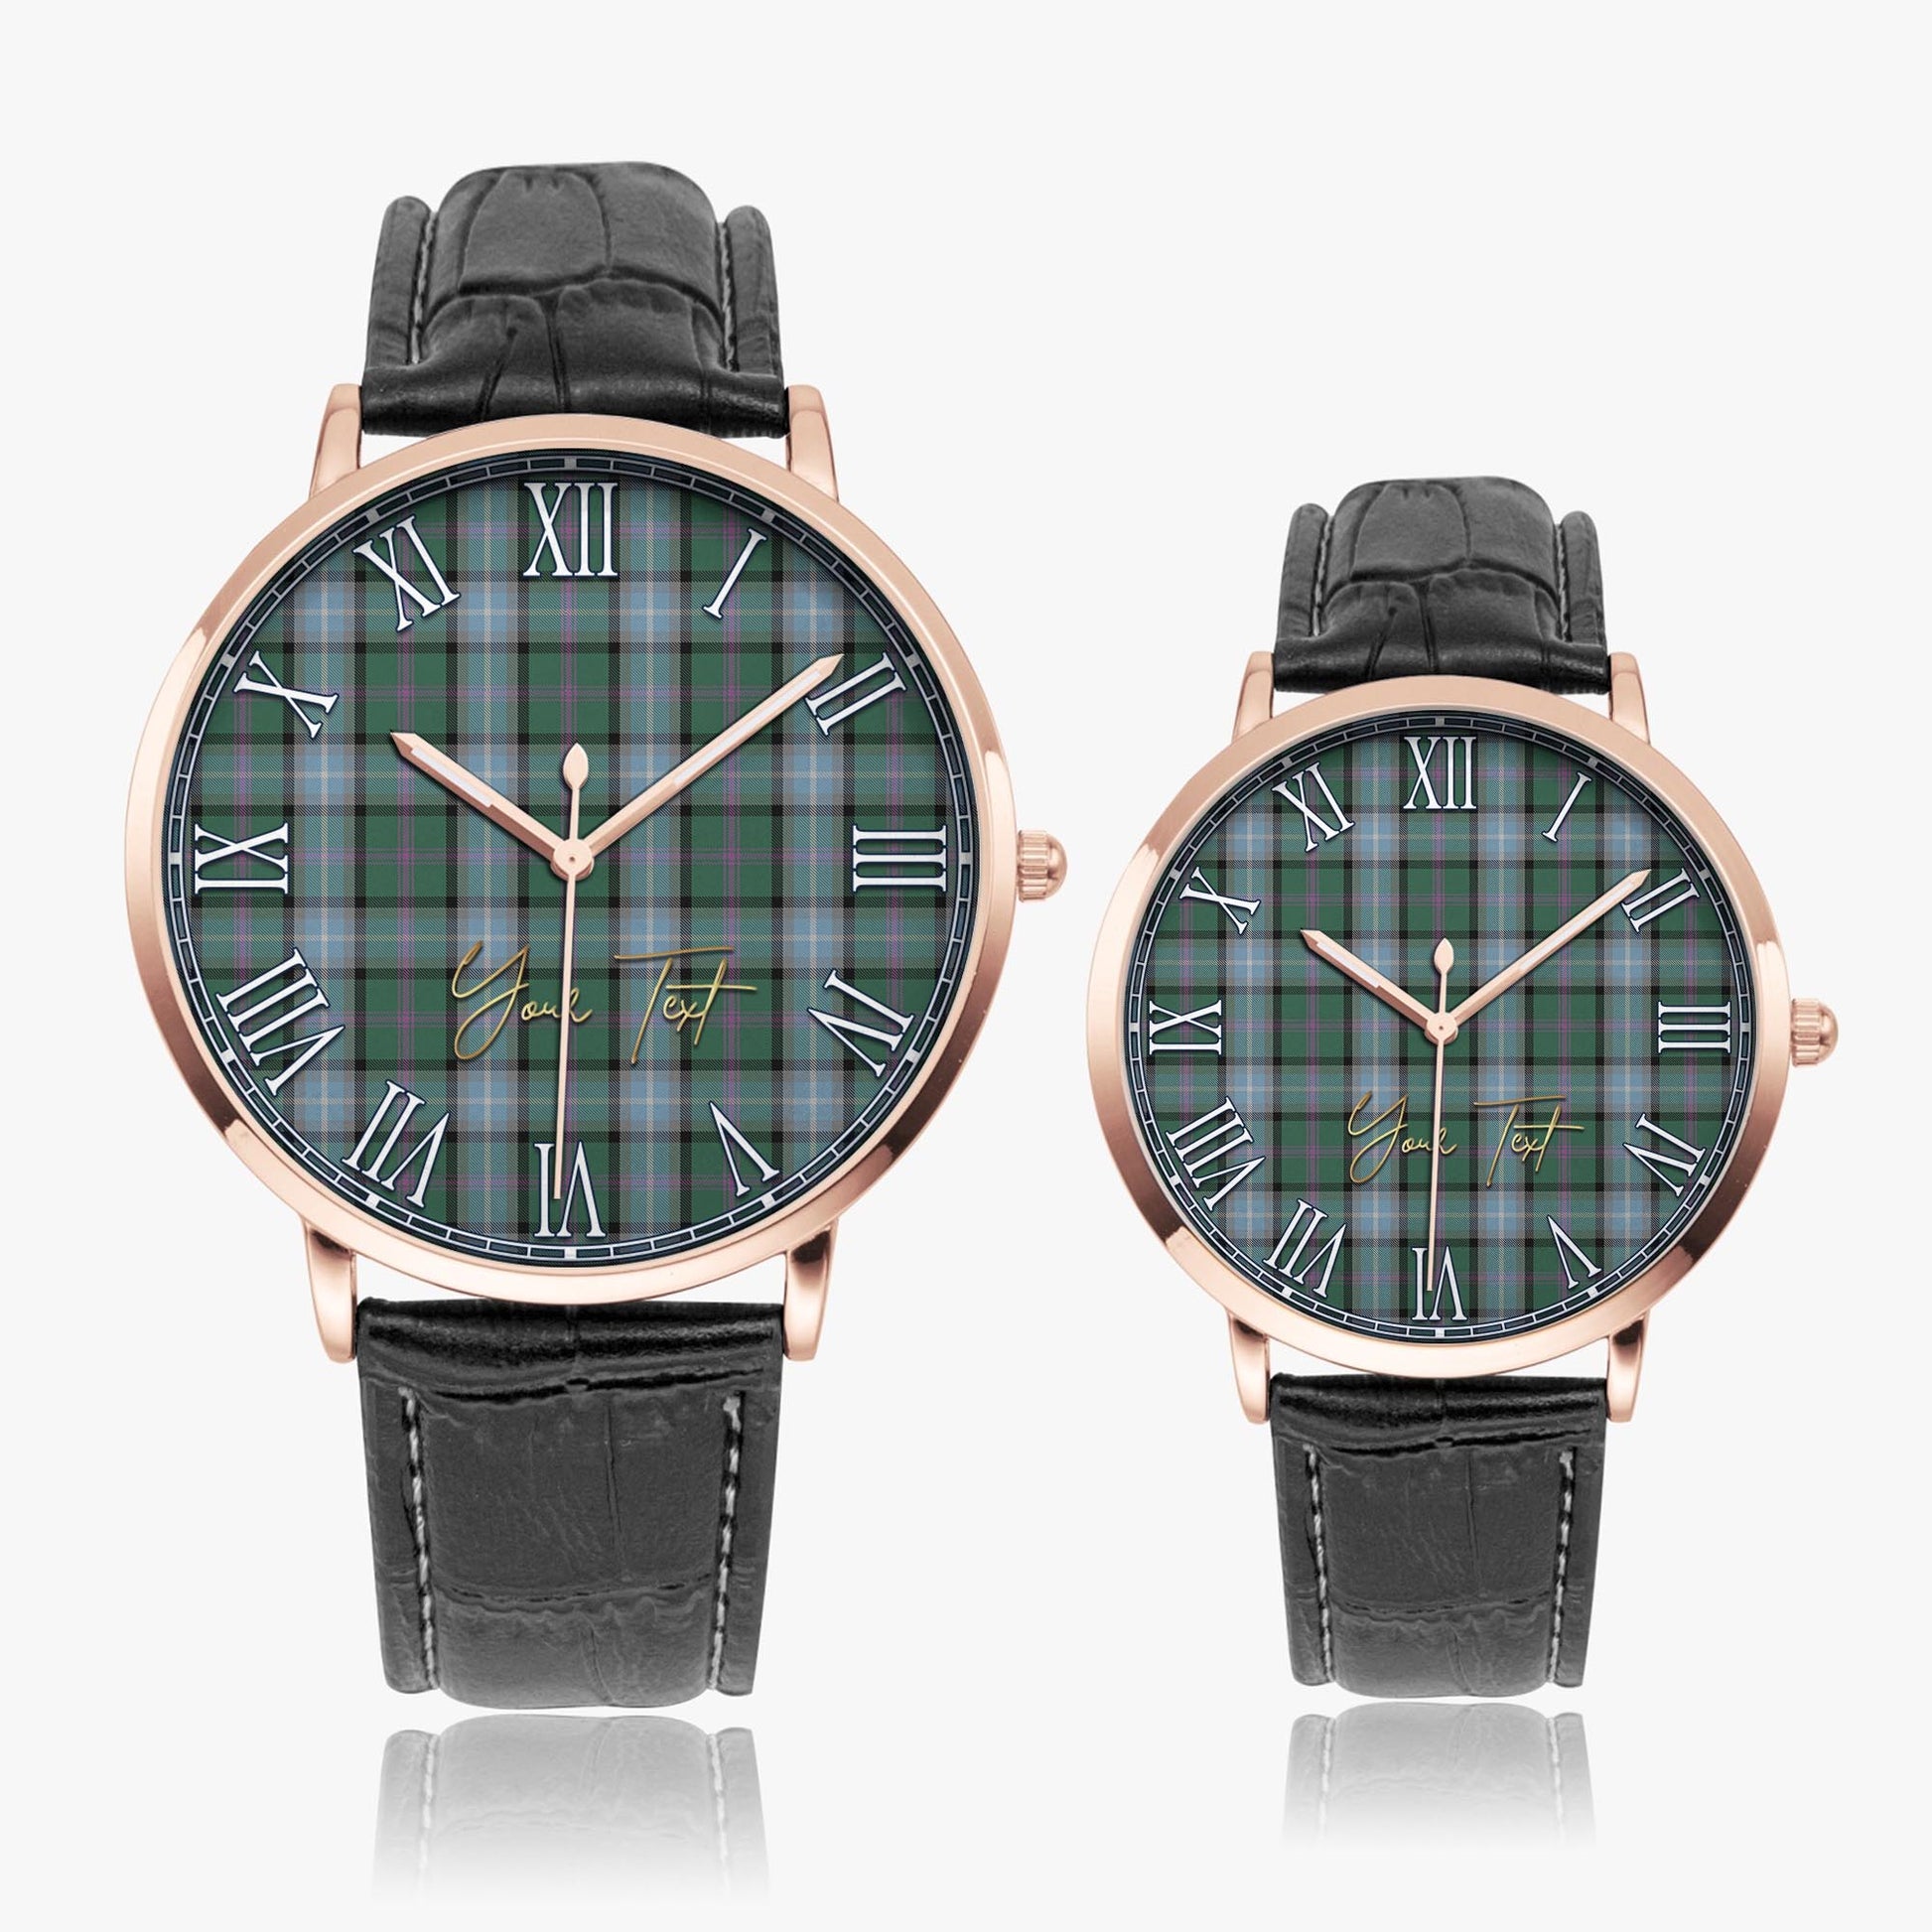 Alexander of Menstry Hunting Tartan Personalized Your Text Leather Trap Quartz Watch Ultra Thin Rose Gold Case With Black Leather Strap - Tartanvibesclothing